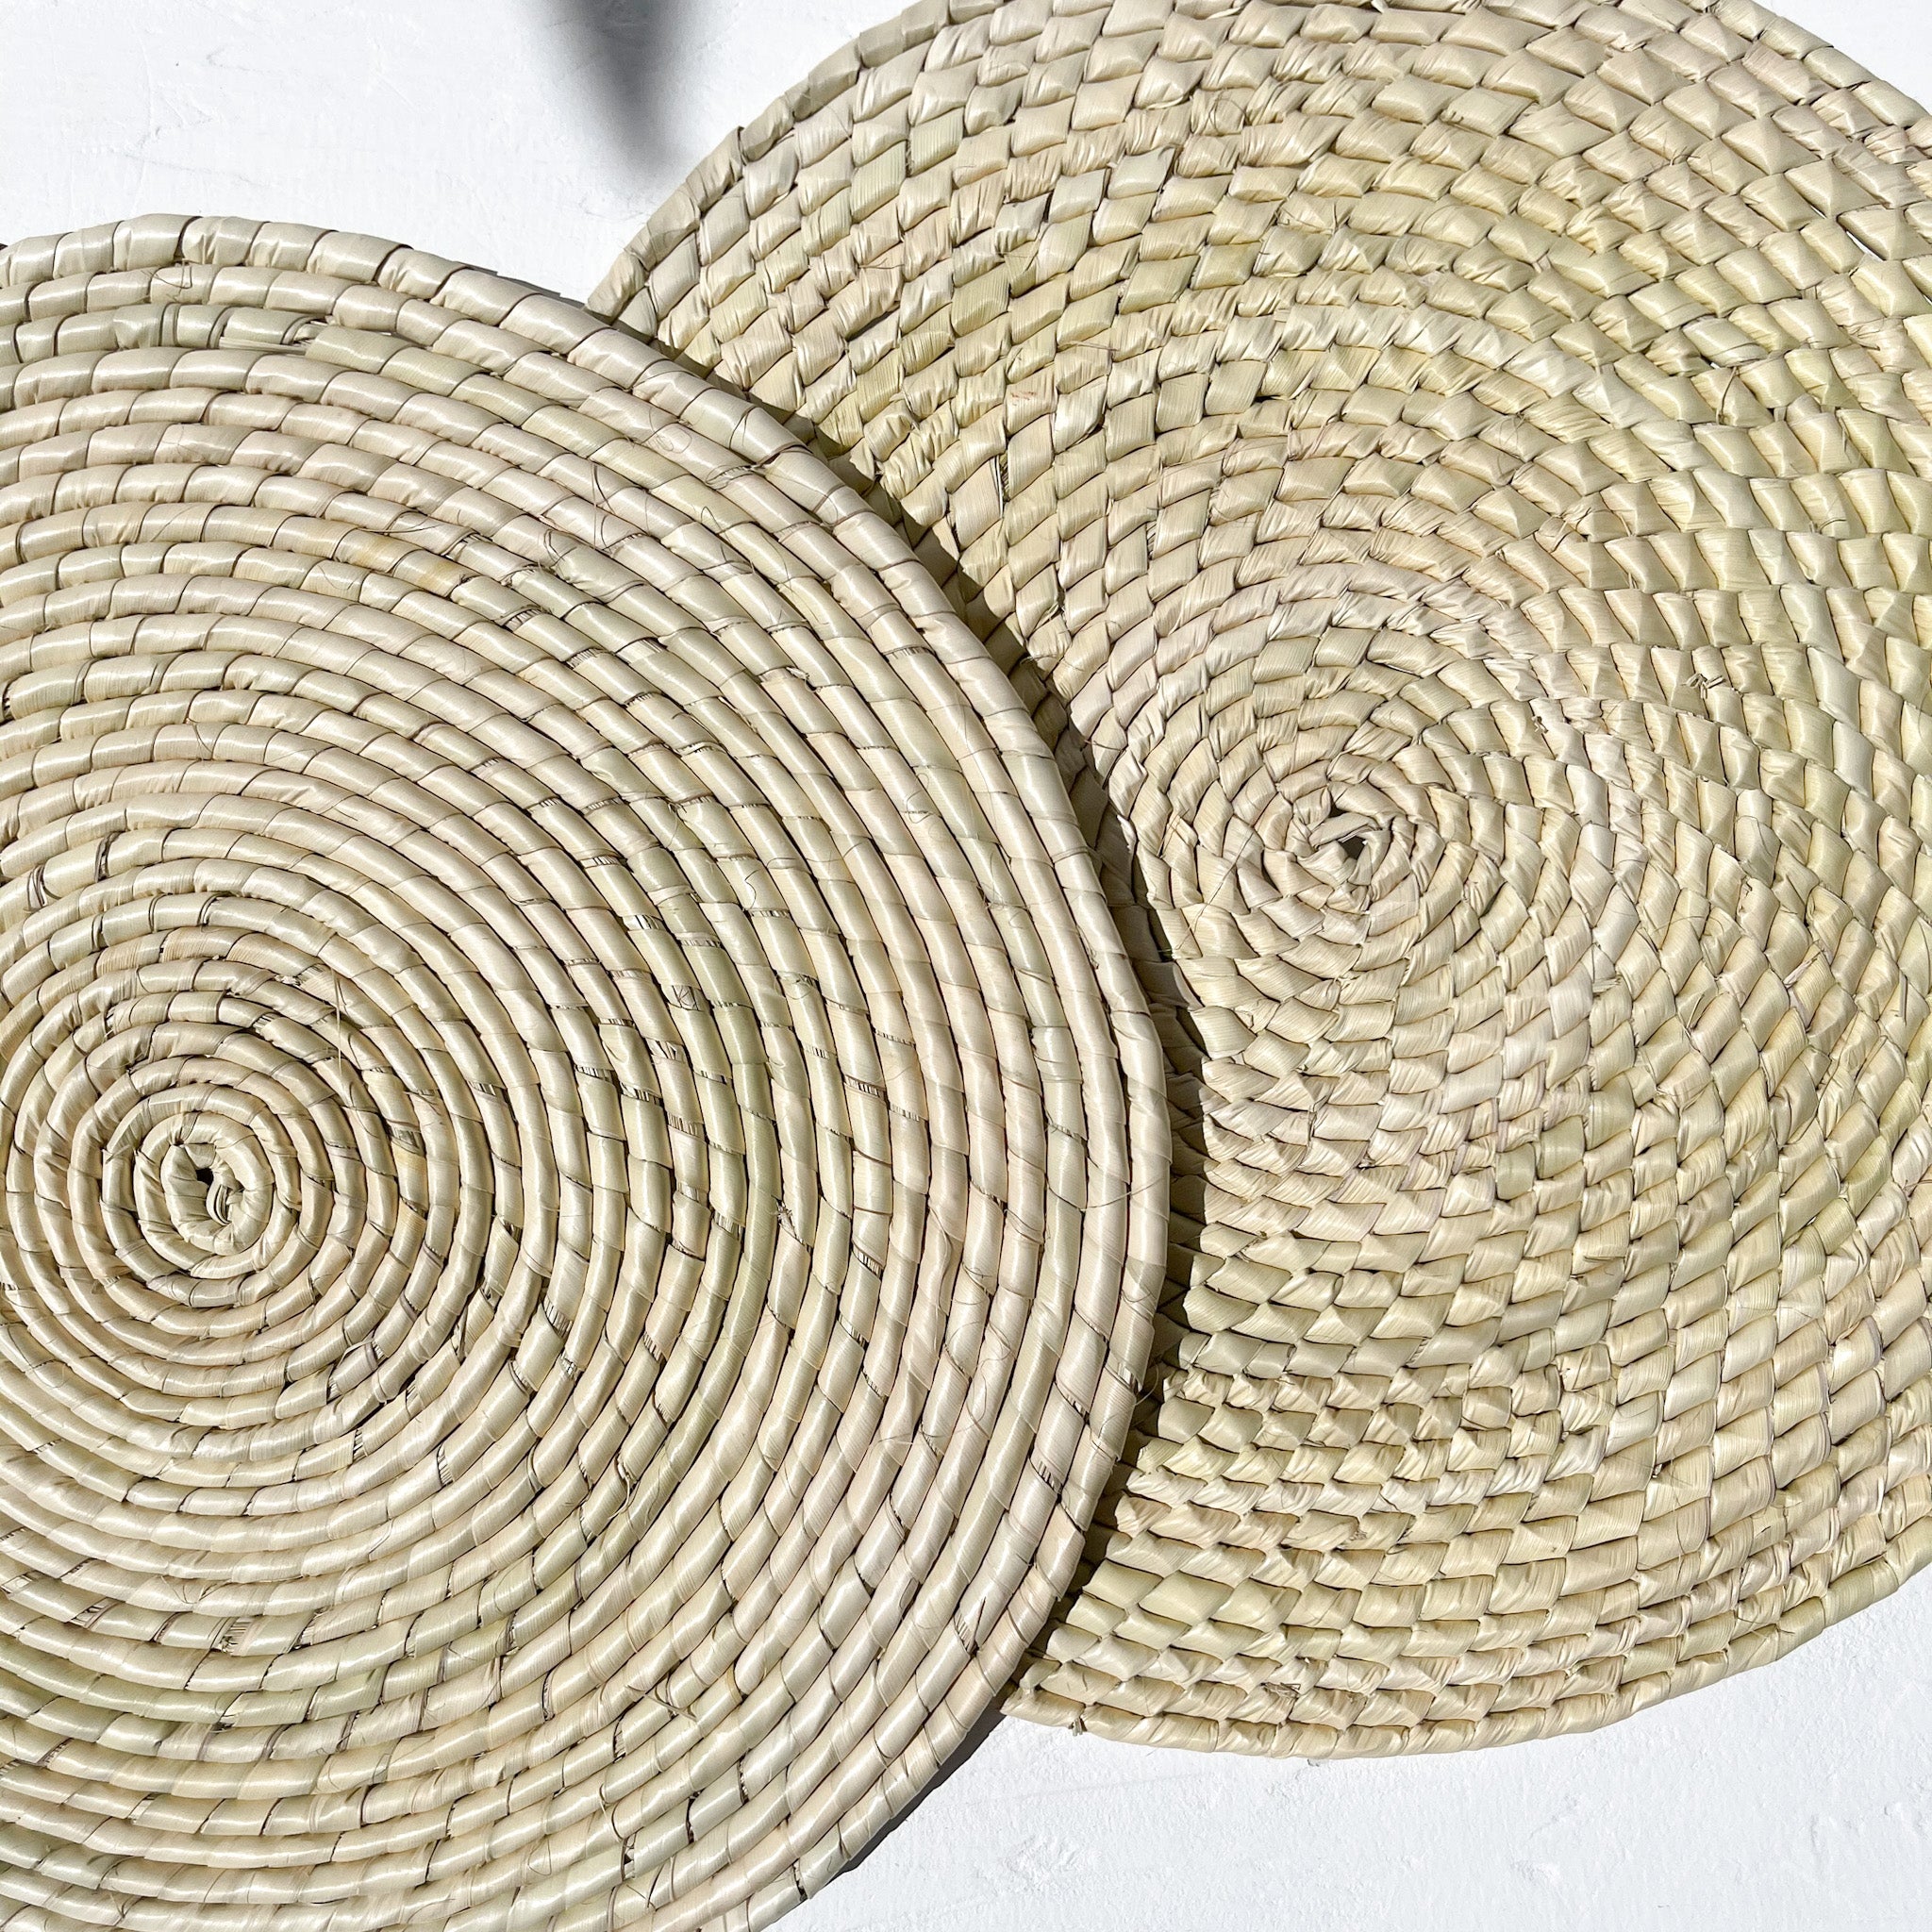 A set of handwoven palm placemats.